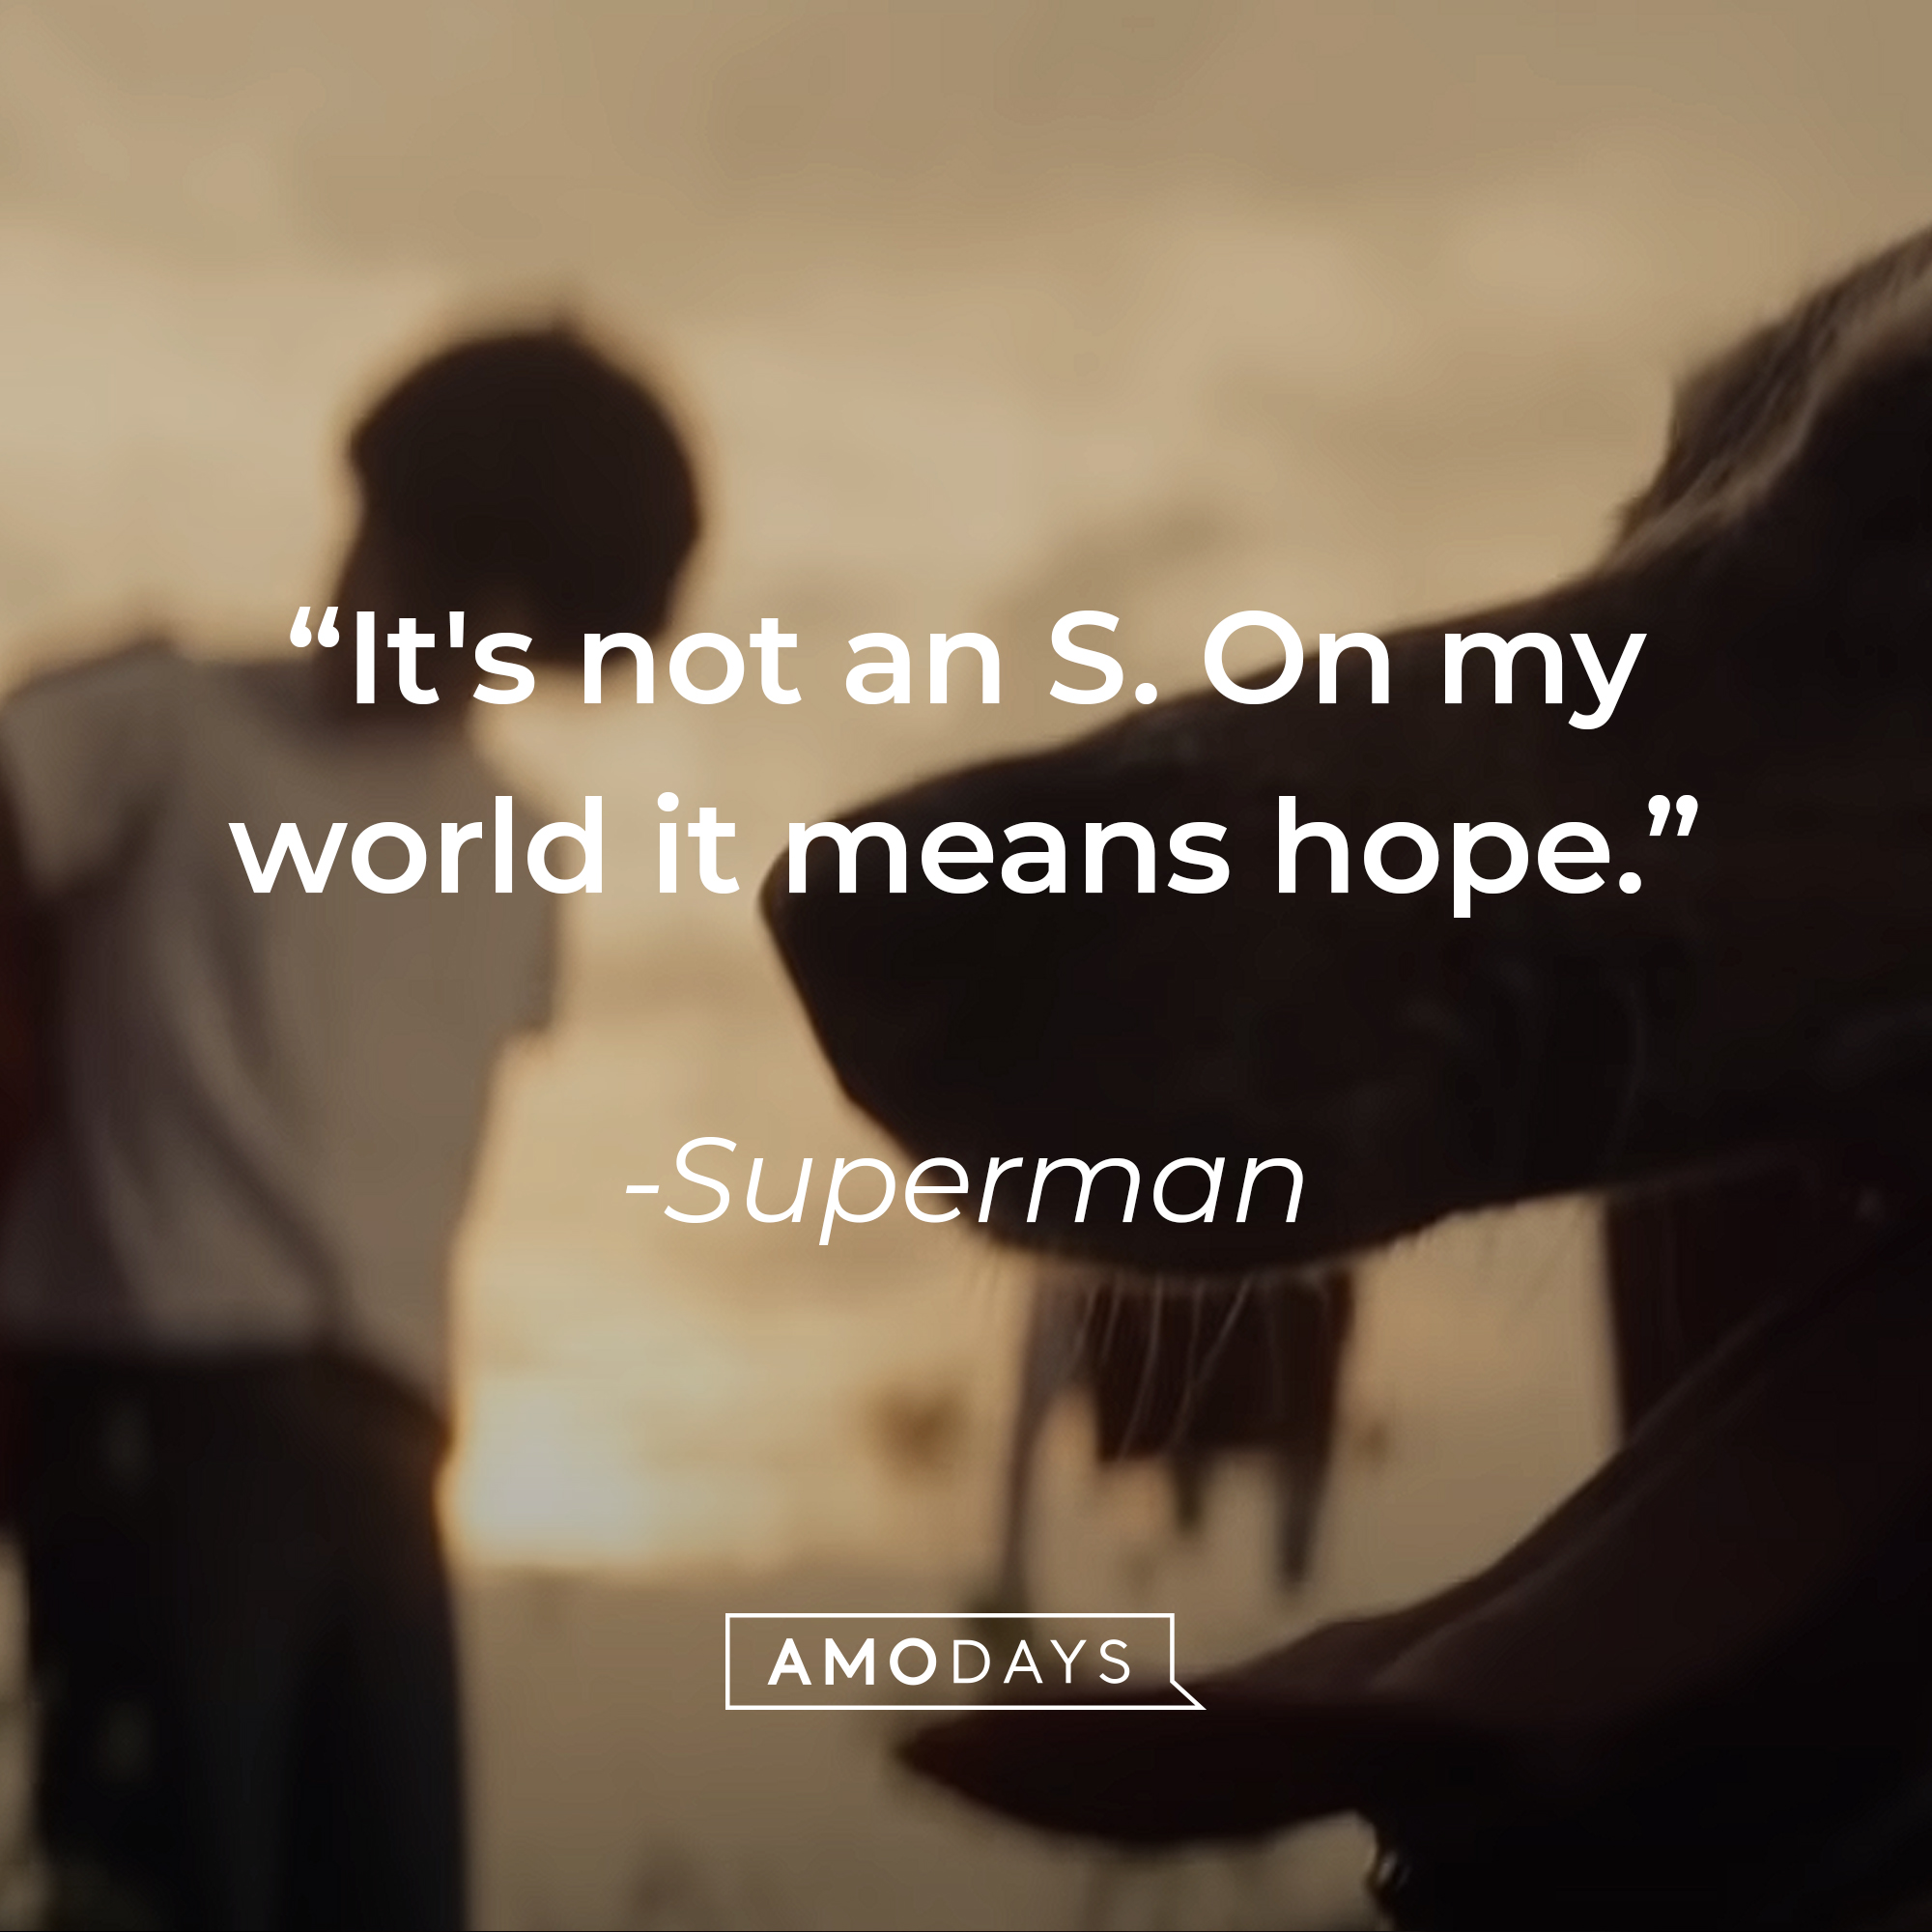 Superman's quote: "It's not an S. On my world it means hope." | Source: Youtube.com/WarnerBrosPictures